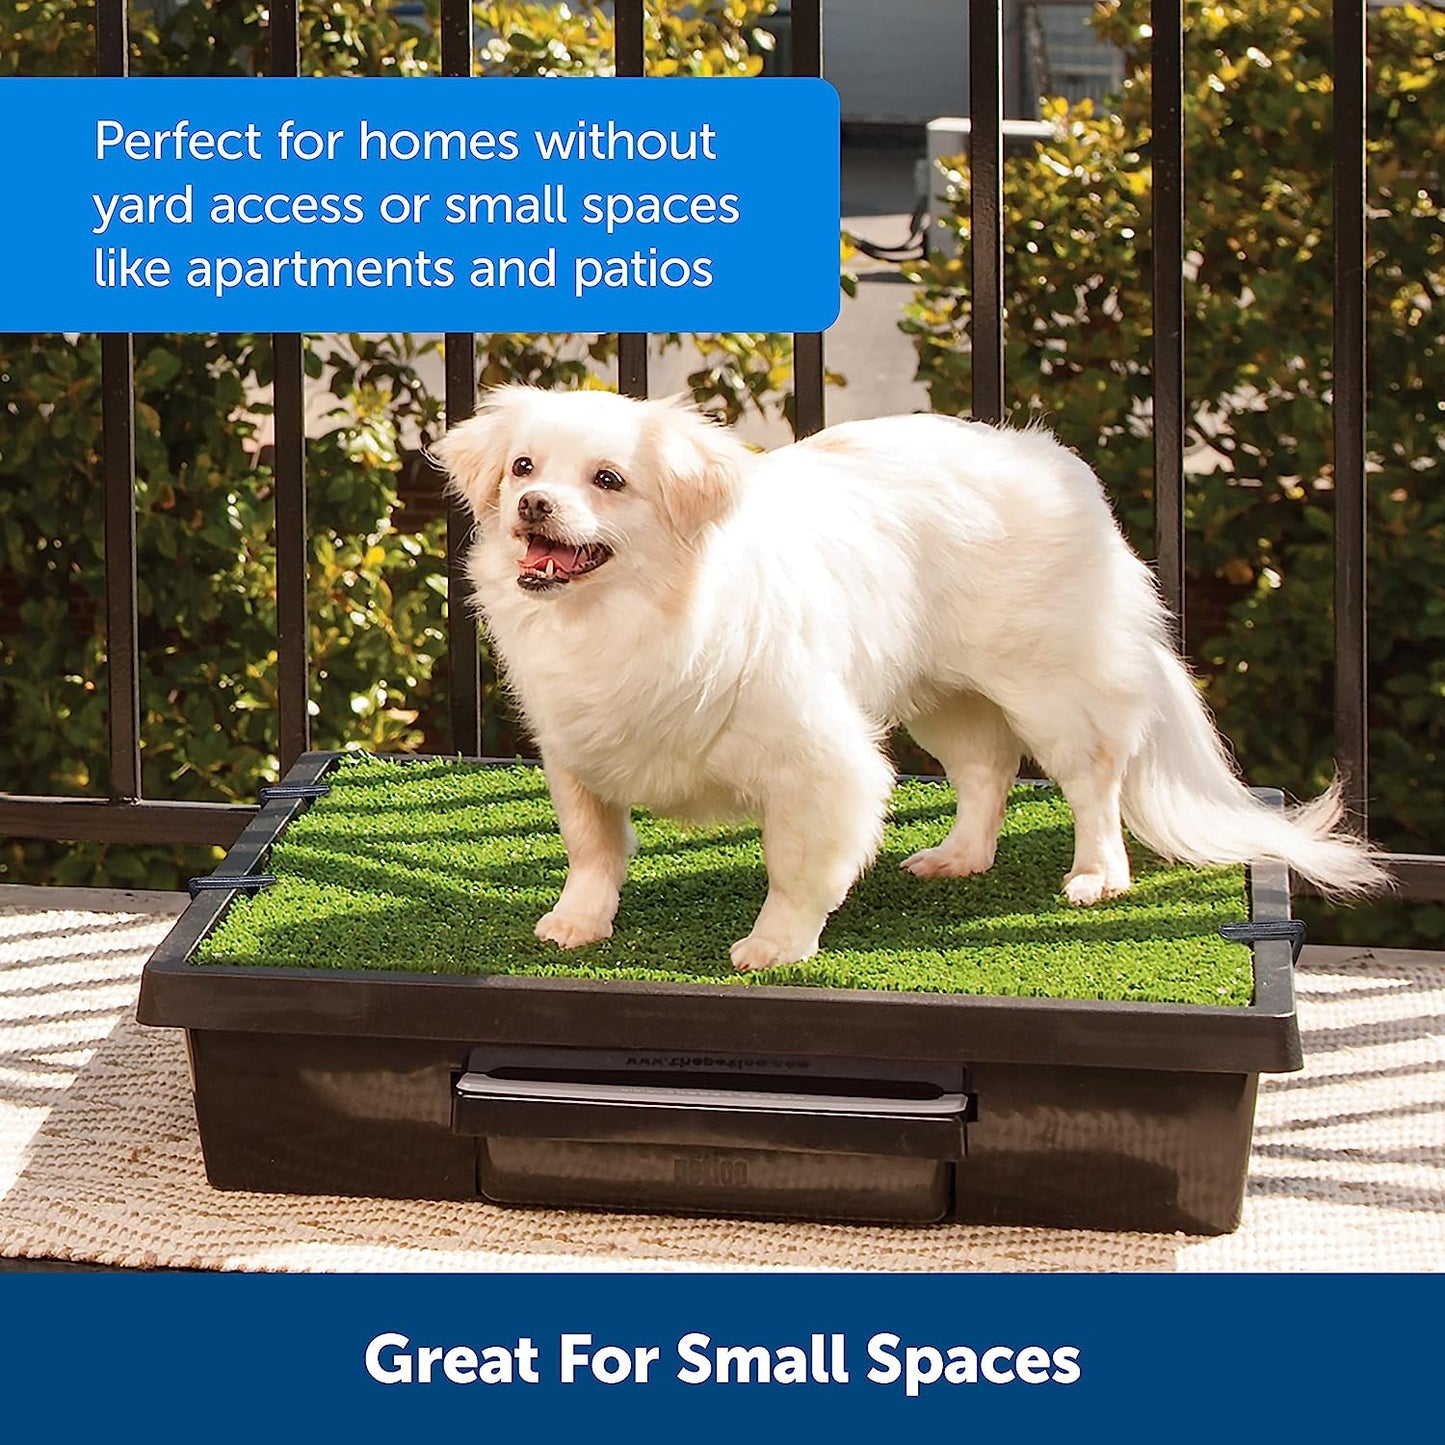 Large Portable Toilet for Dogs and Pets